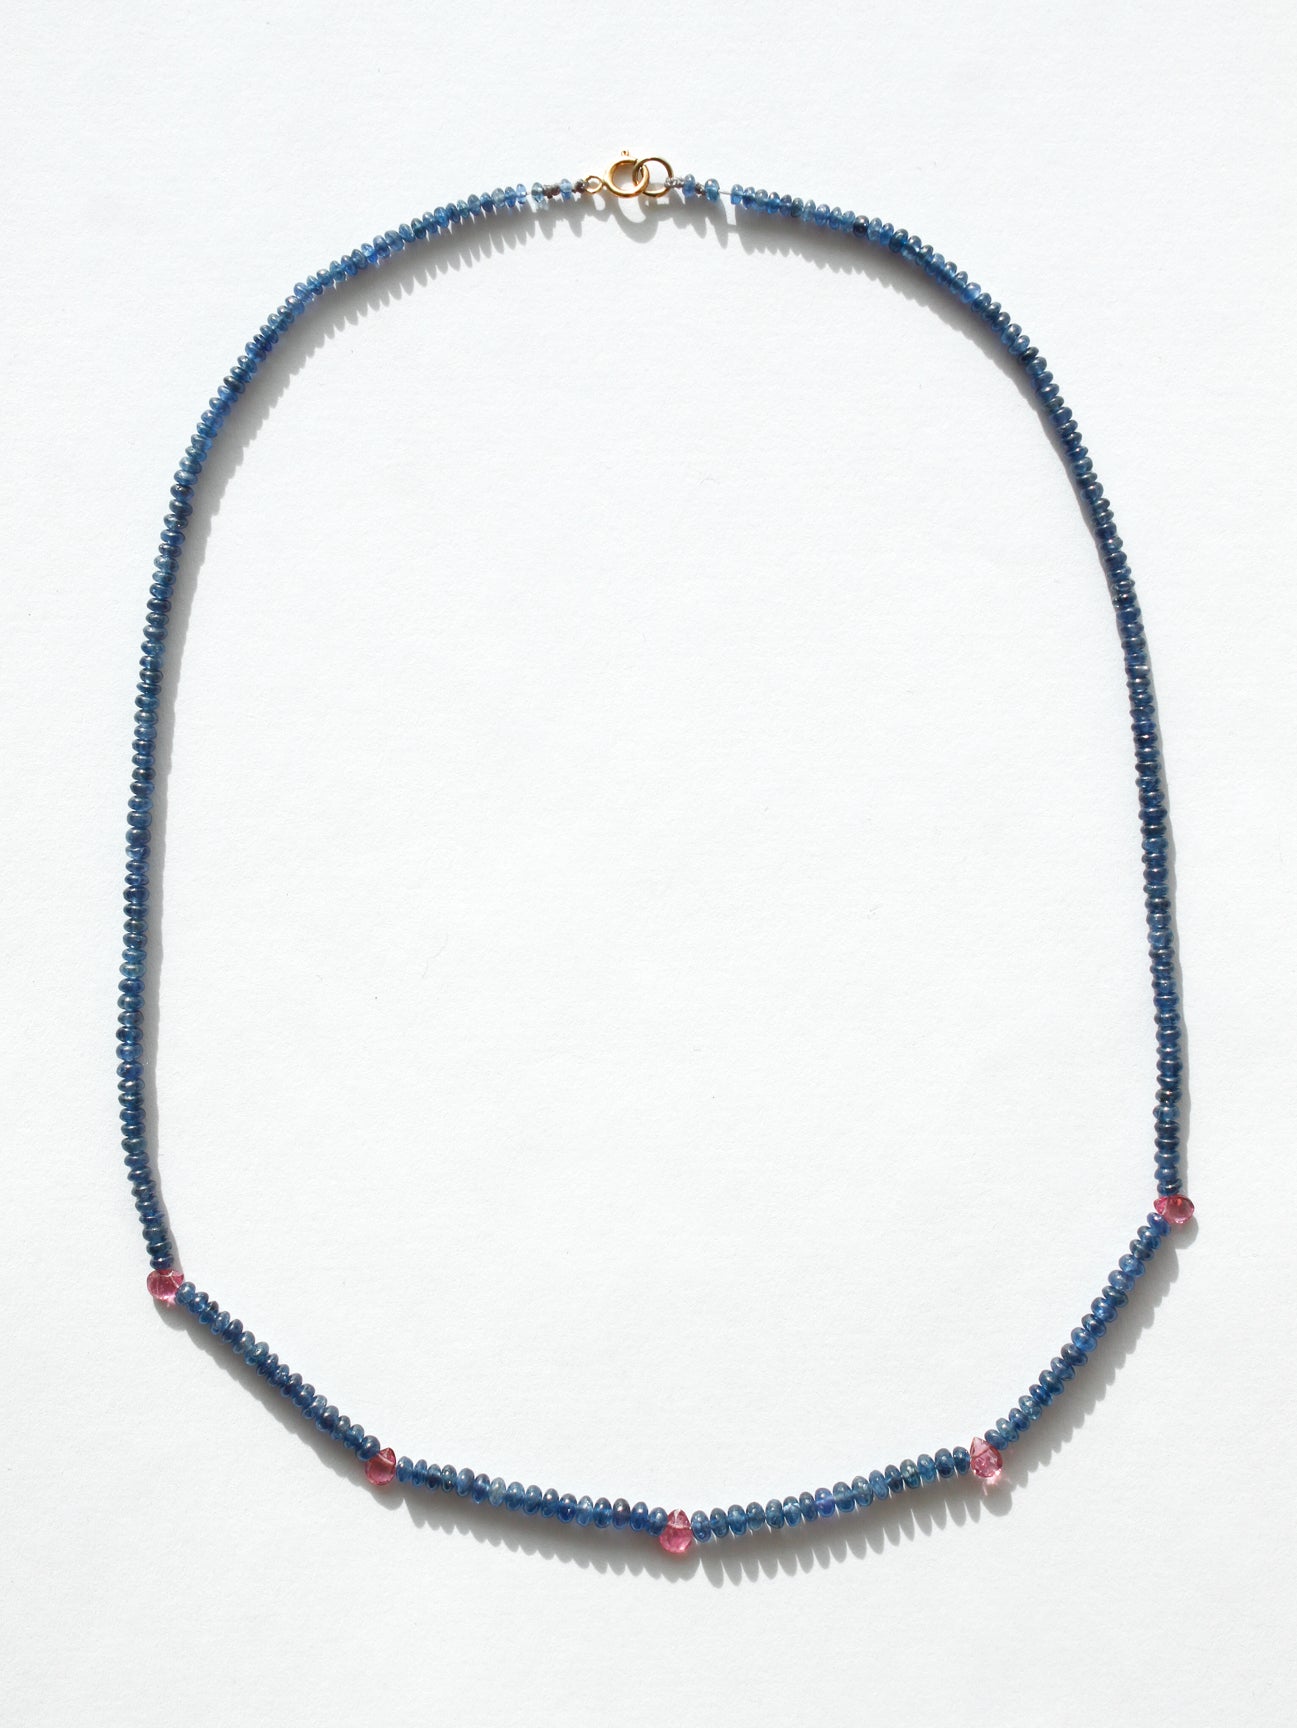 Stone Necklace - Blue Sapphire and Pink Tourmaline